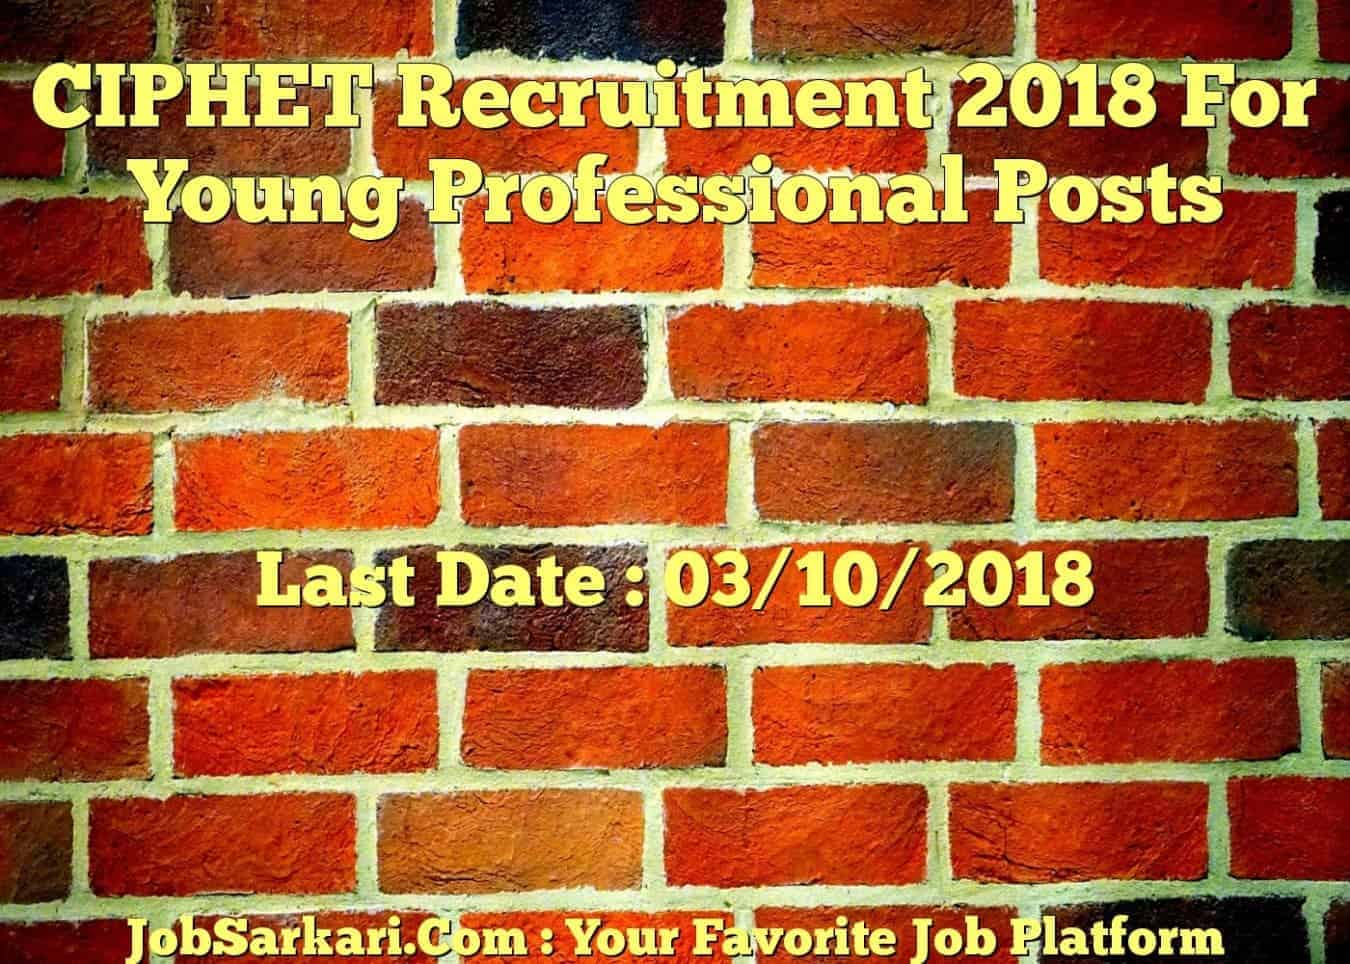 CIPHET Recruitment 2018 For Young Professional Posts